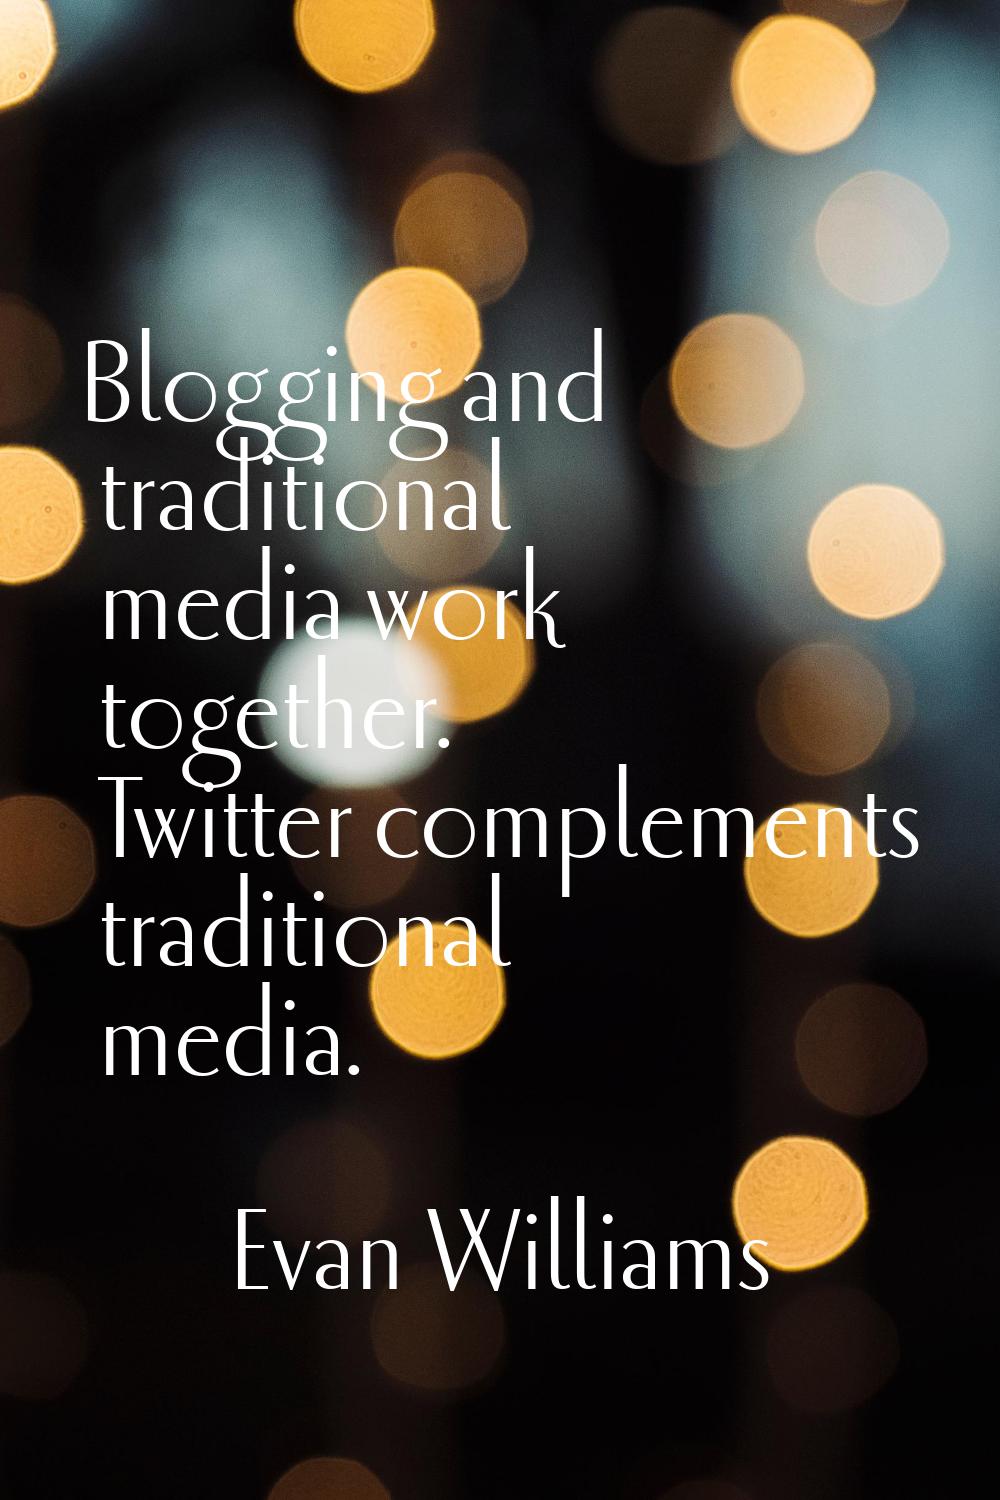 Blogging and traditional media work together. Twitter complements traditional media.